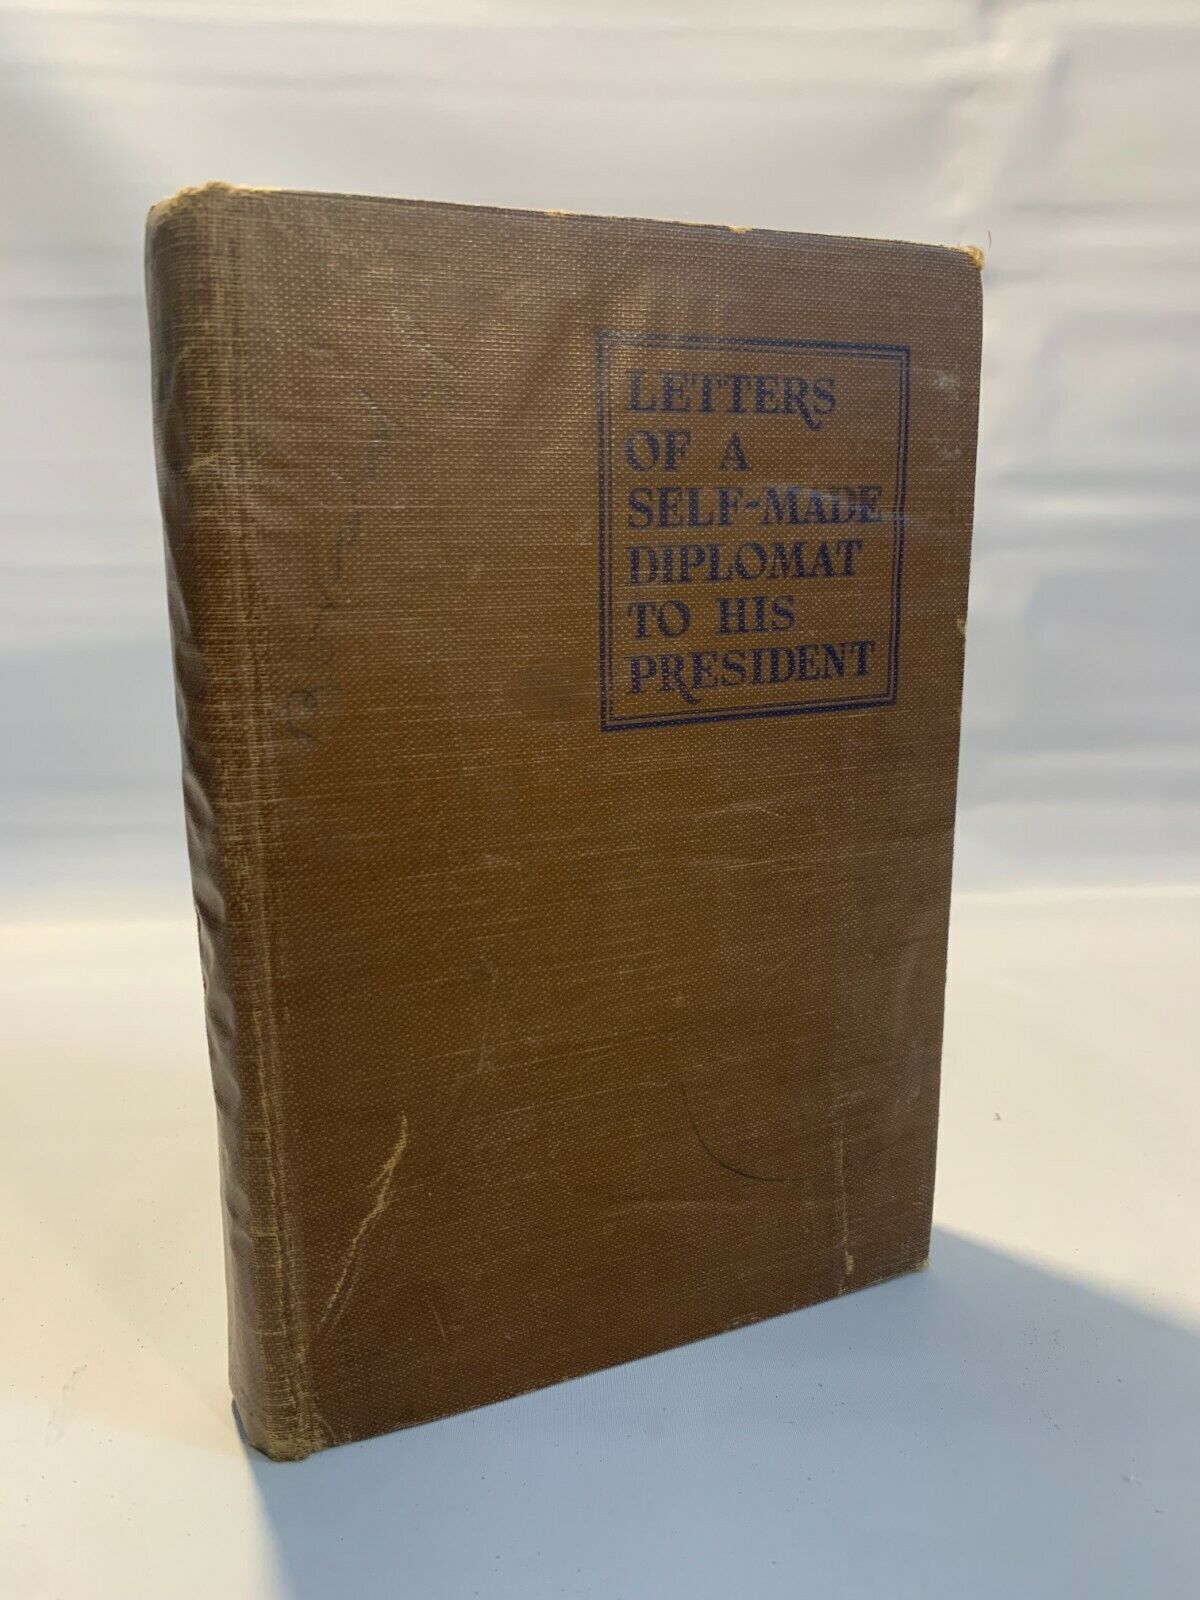 Letters of a Self-Made Diplomat to His President, Will Rogers, First Ed., 1926